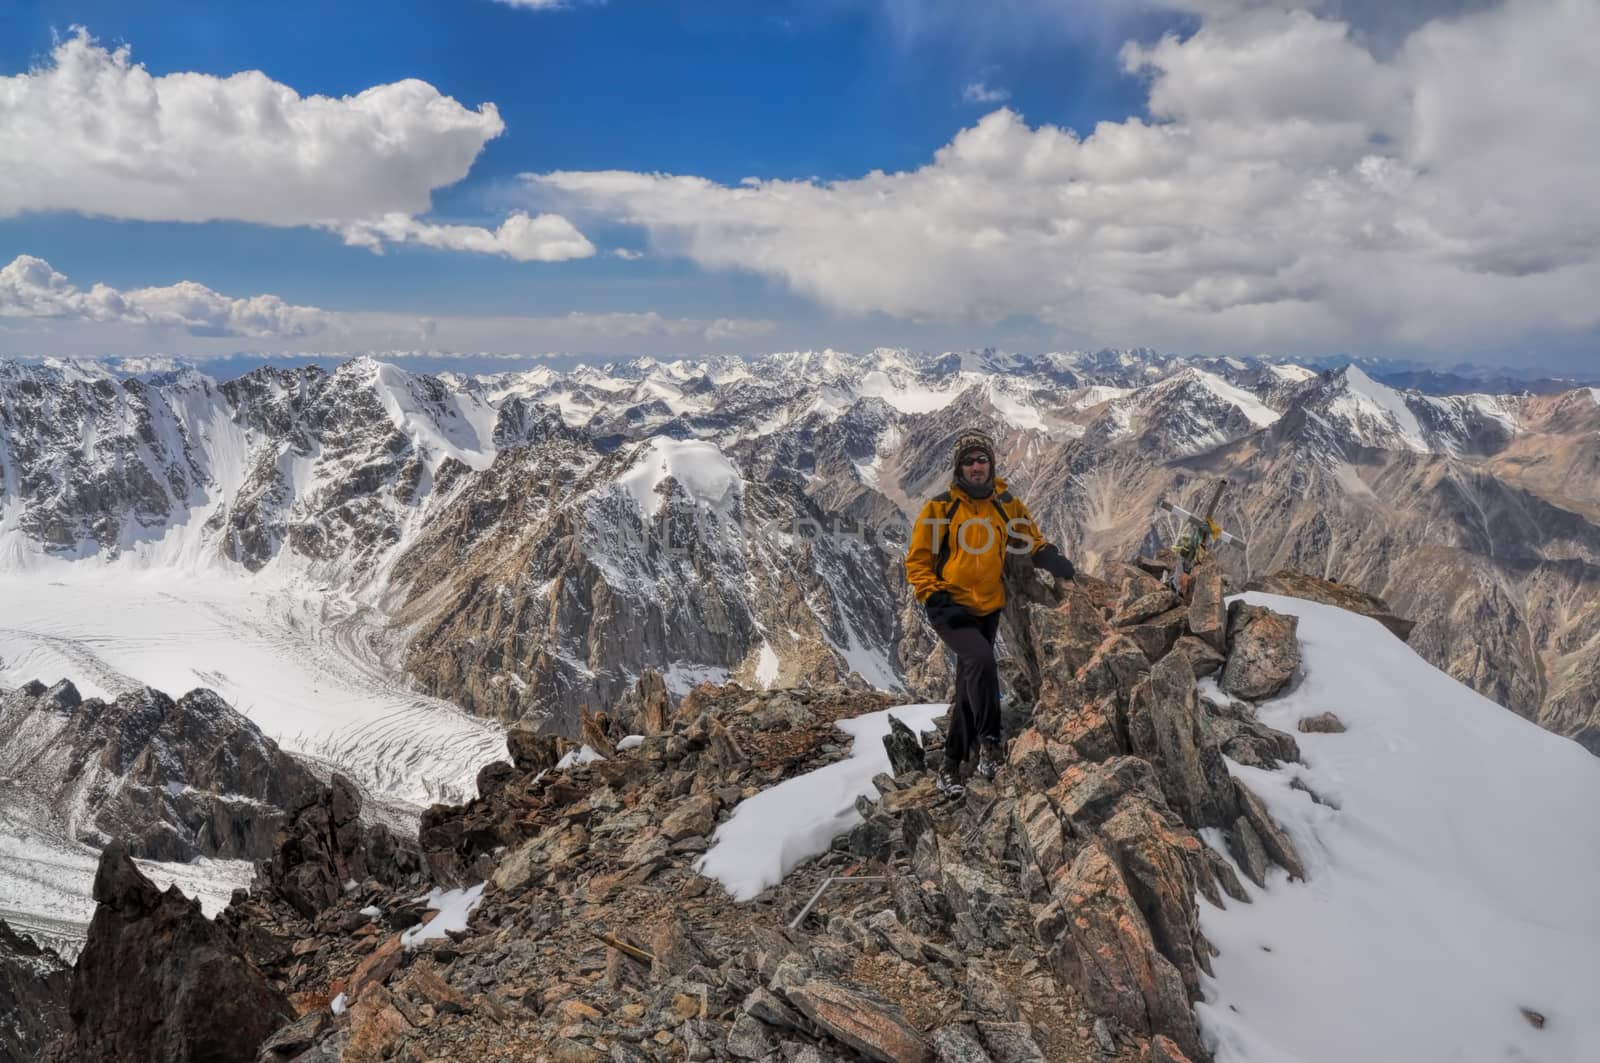 Adventurous young hiker on mountain summit in scenic Tian Shan range in Kyrgyzstan, Ala Archa national park